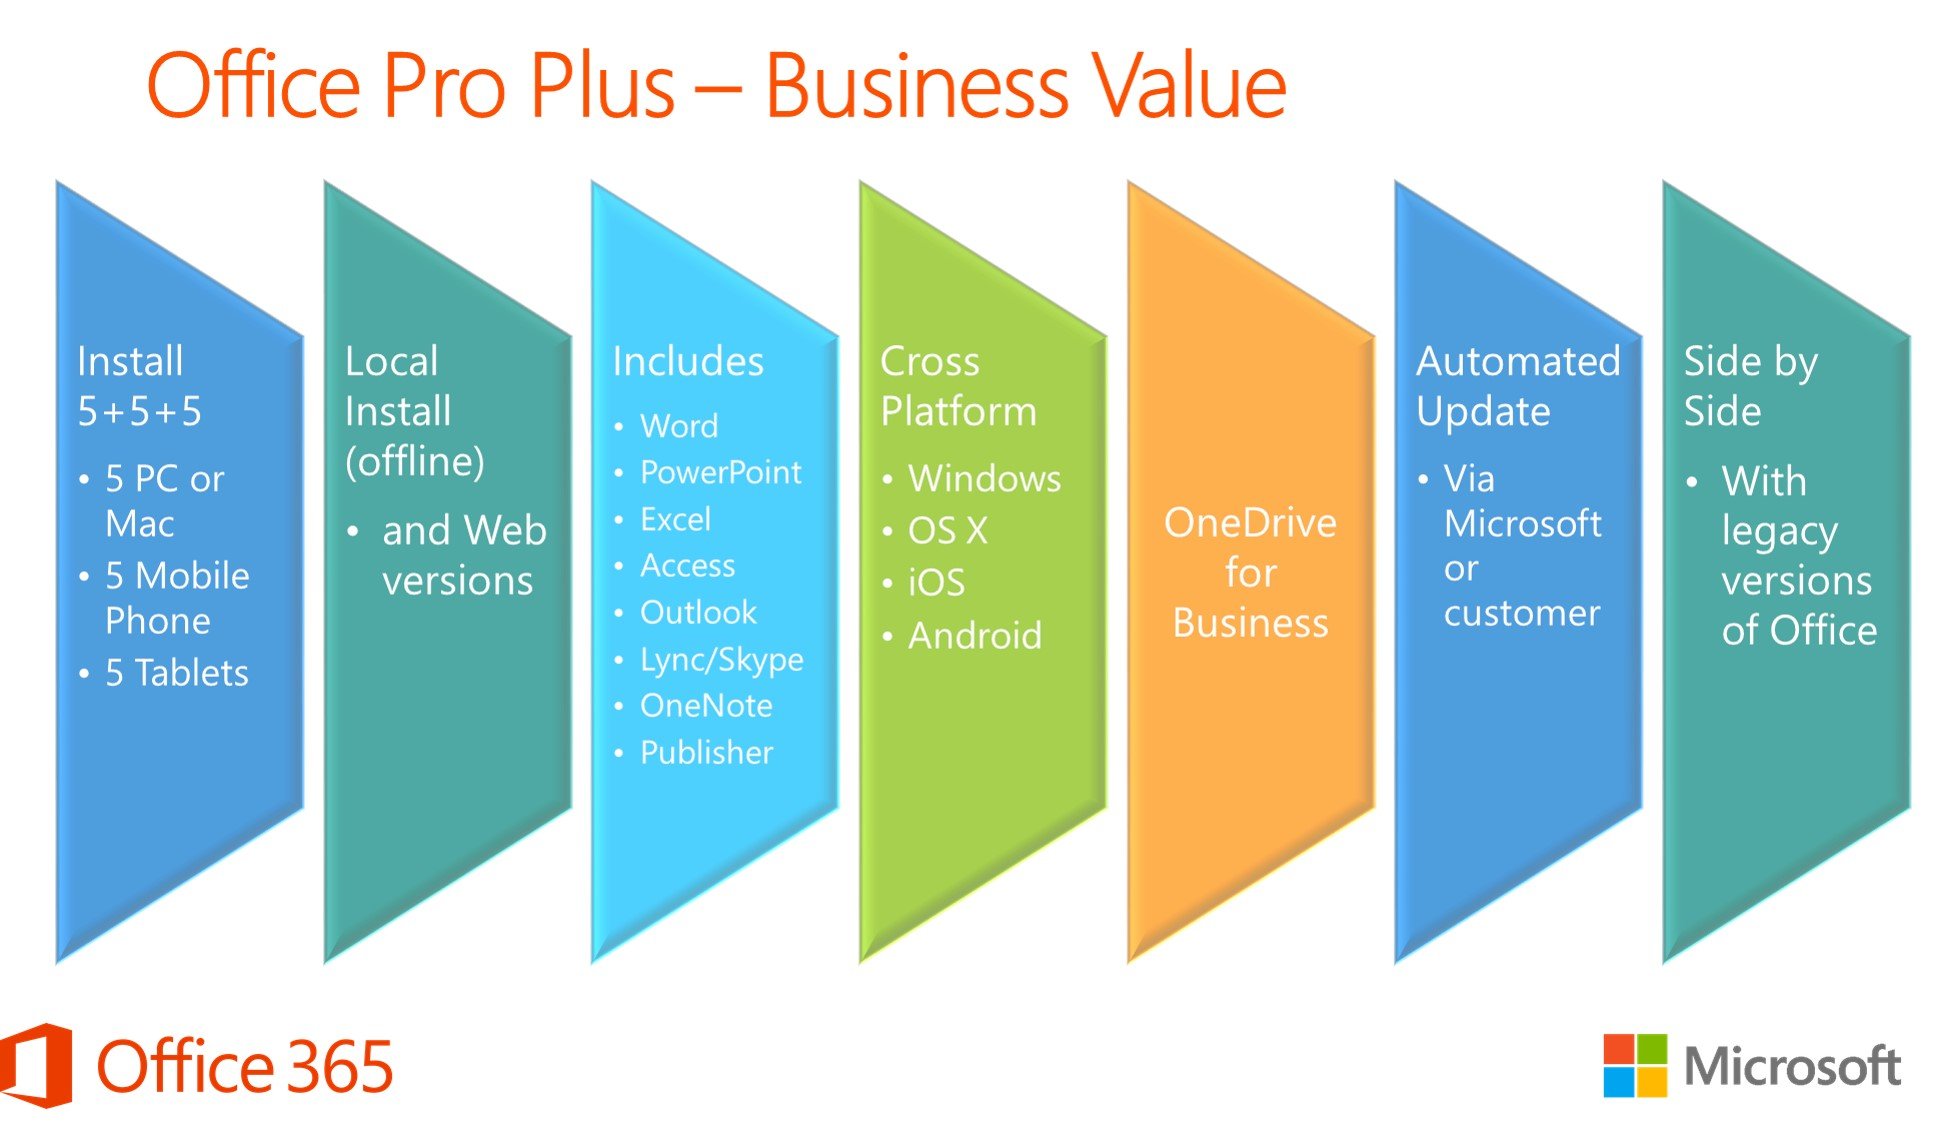 The differences between Office Pro Plus & Office 365 Pro Plus